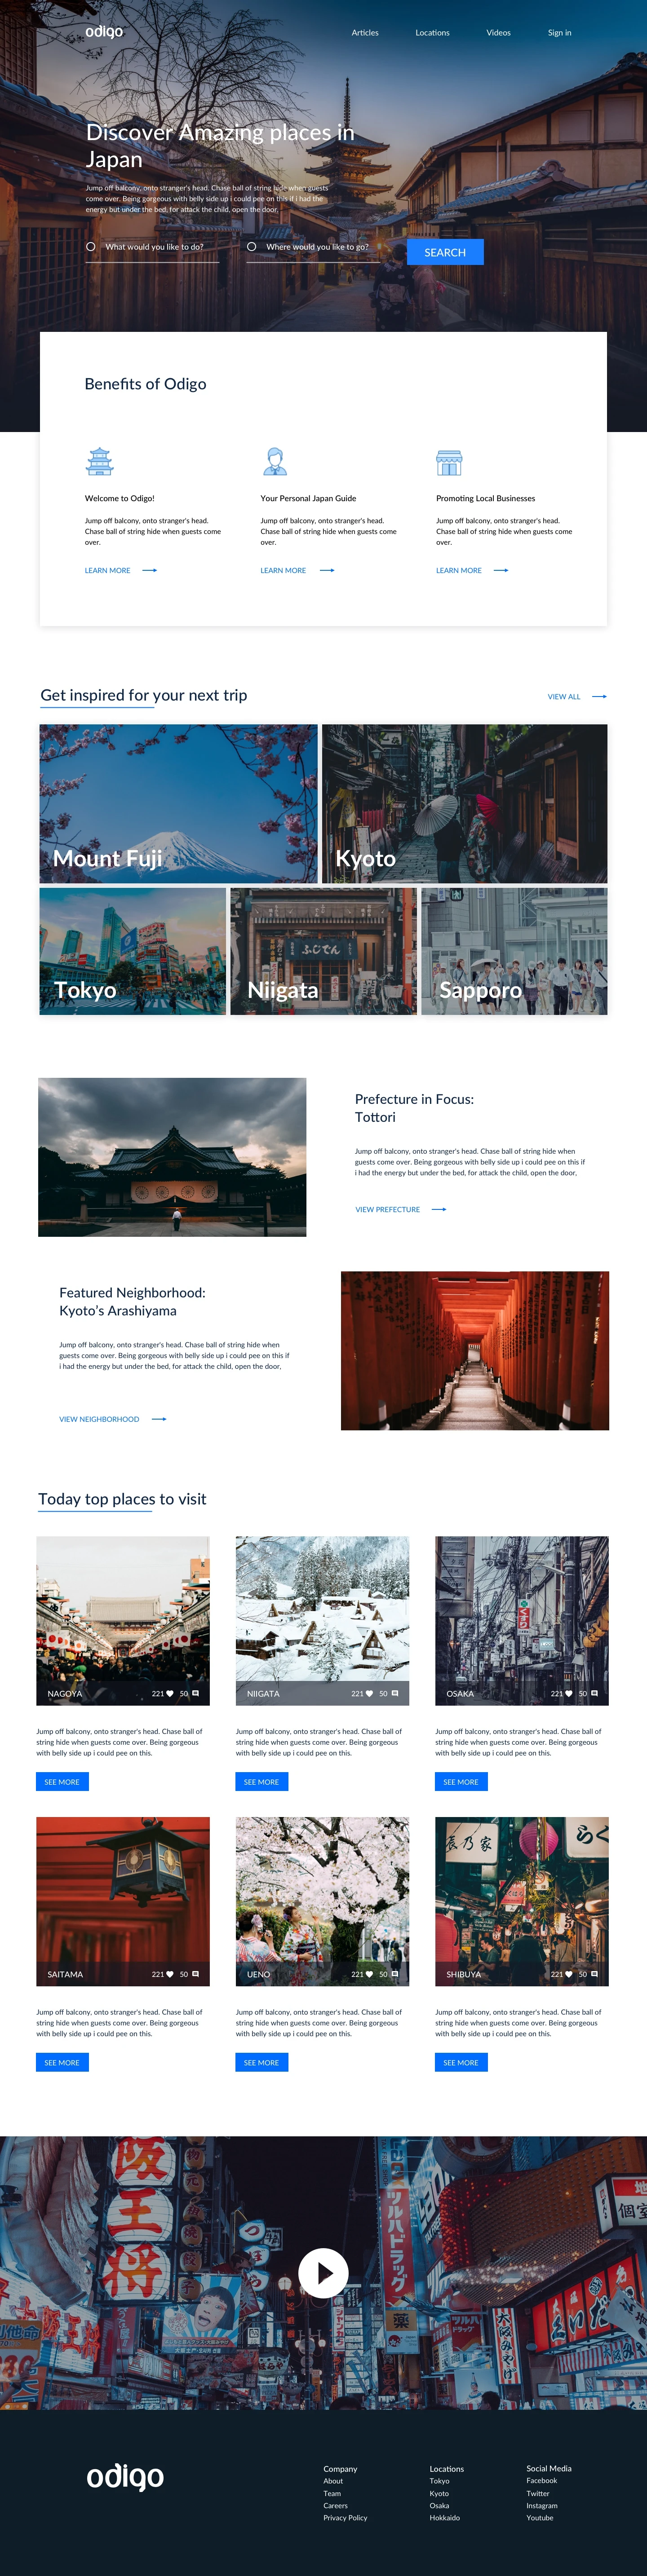 Travel Landing Page - Clean landing page design by Jacob Voyles